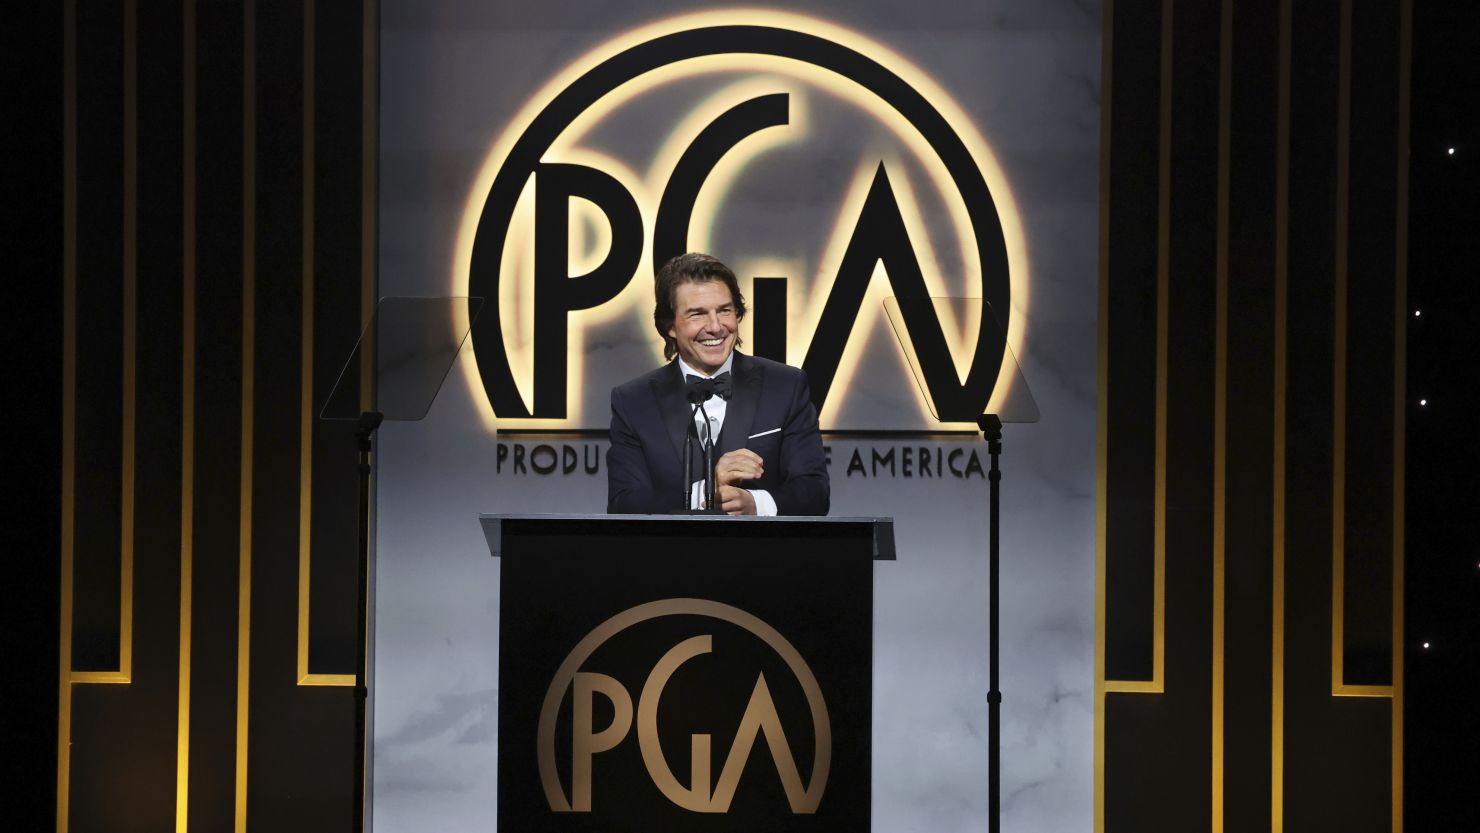 Tom Cruise on stage at the 34th Annual Producers Guild Awards at the Beverly Hilton on Saturday, Feb. 25. in Beverly Hills, California.